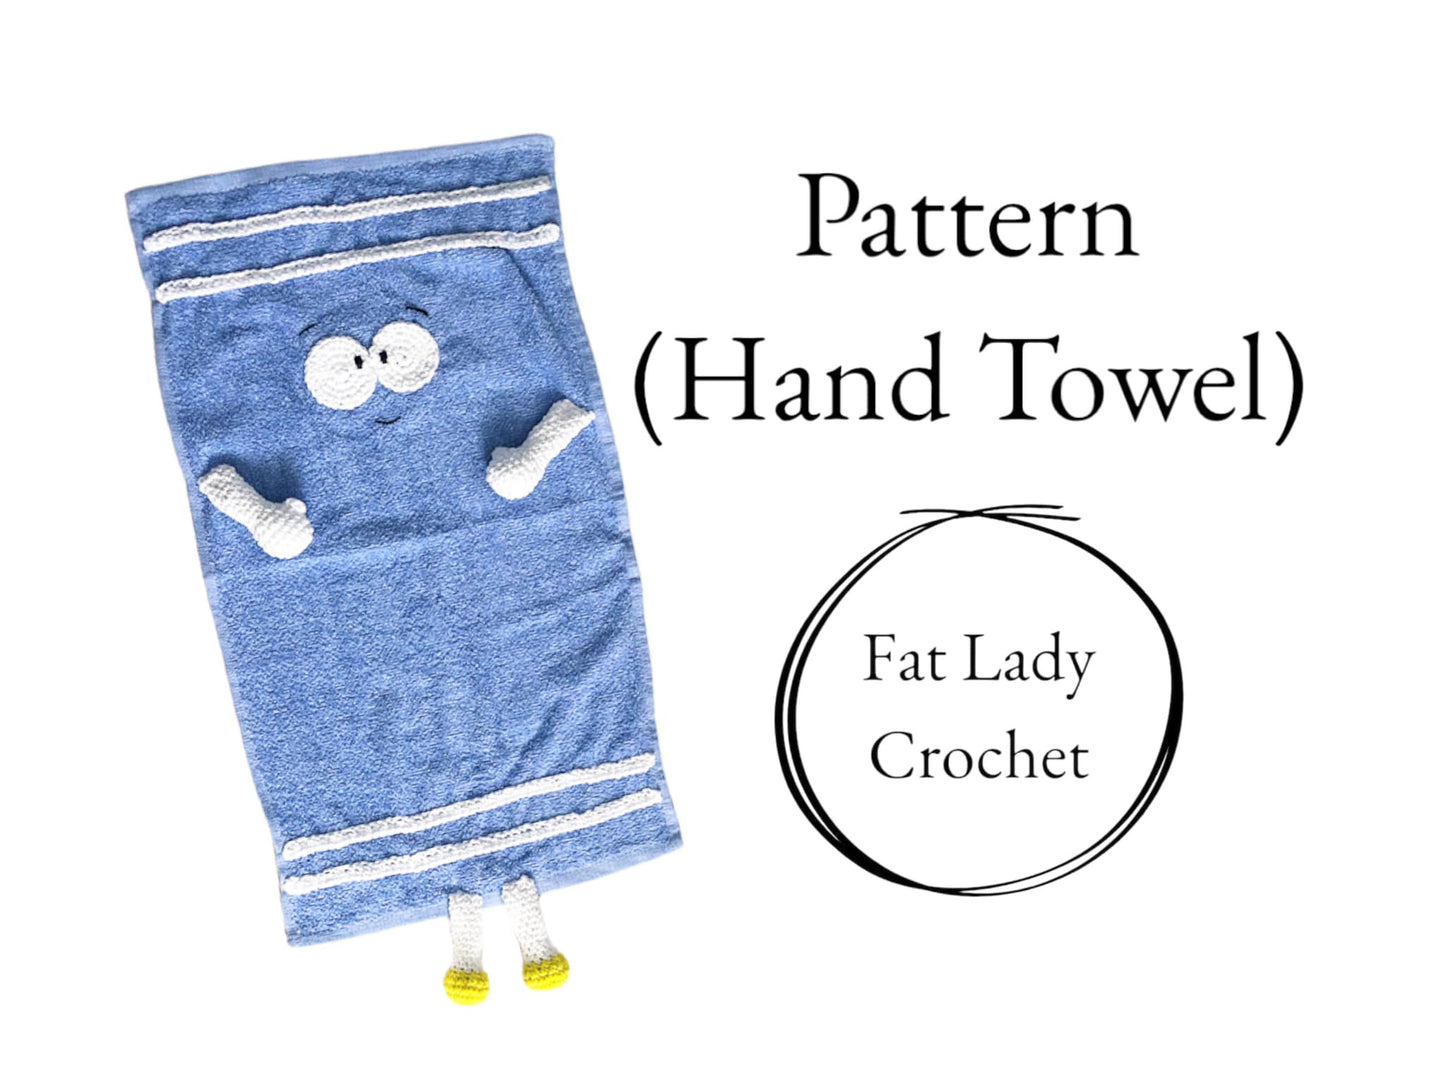 PATTERN Pack: Crochet South Park #2 Pack: Butters, Mister Hankey and Towelie PDFs